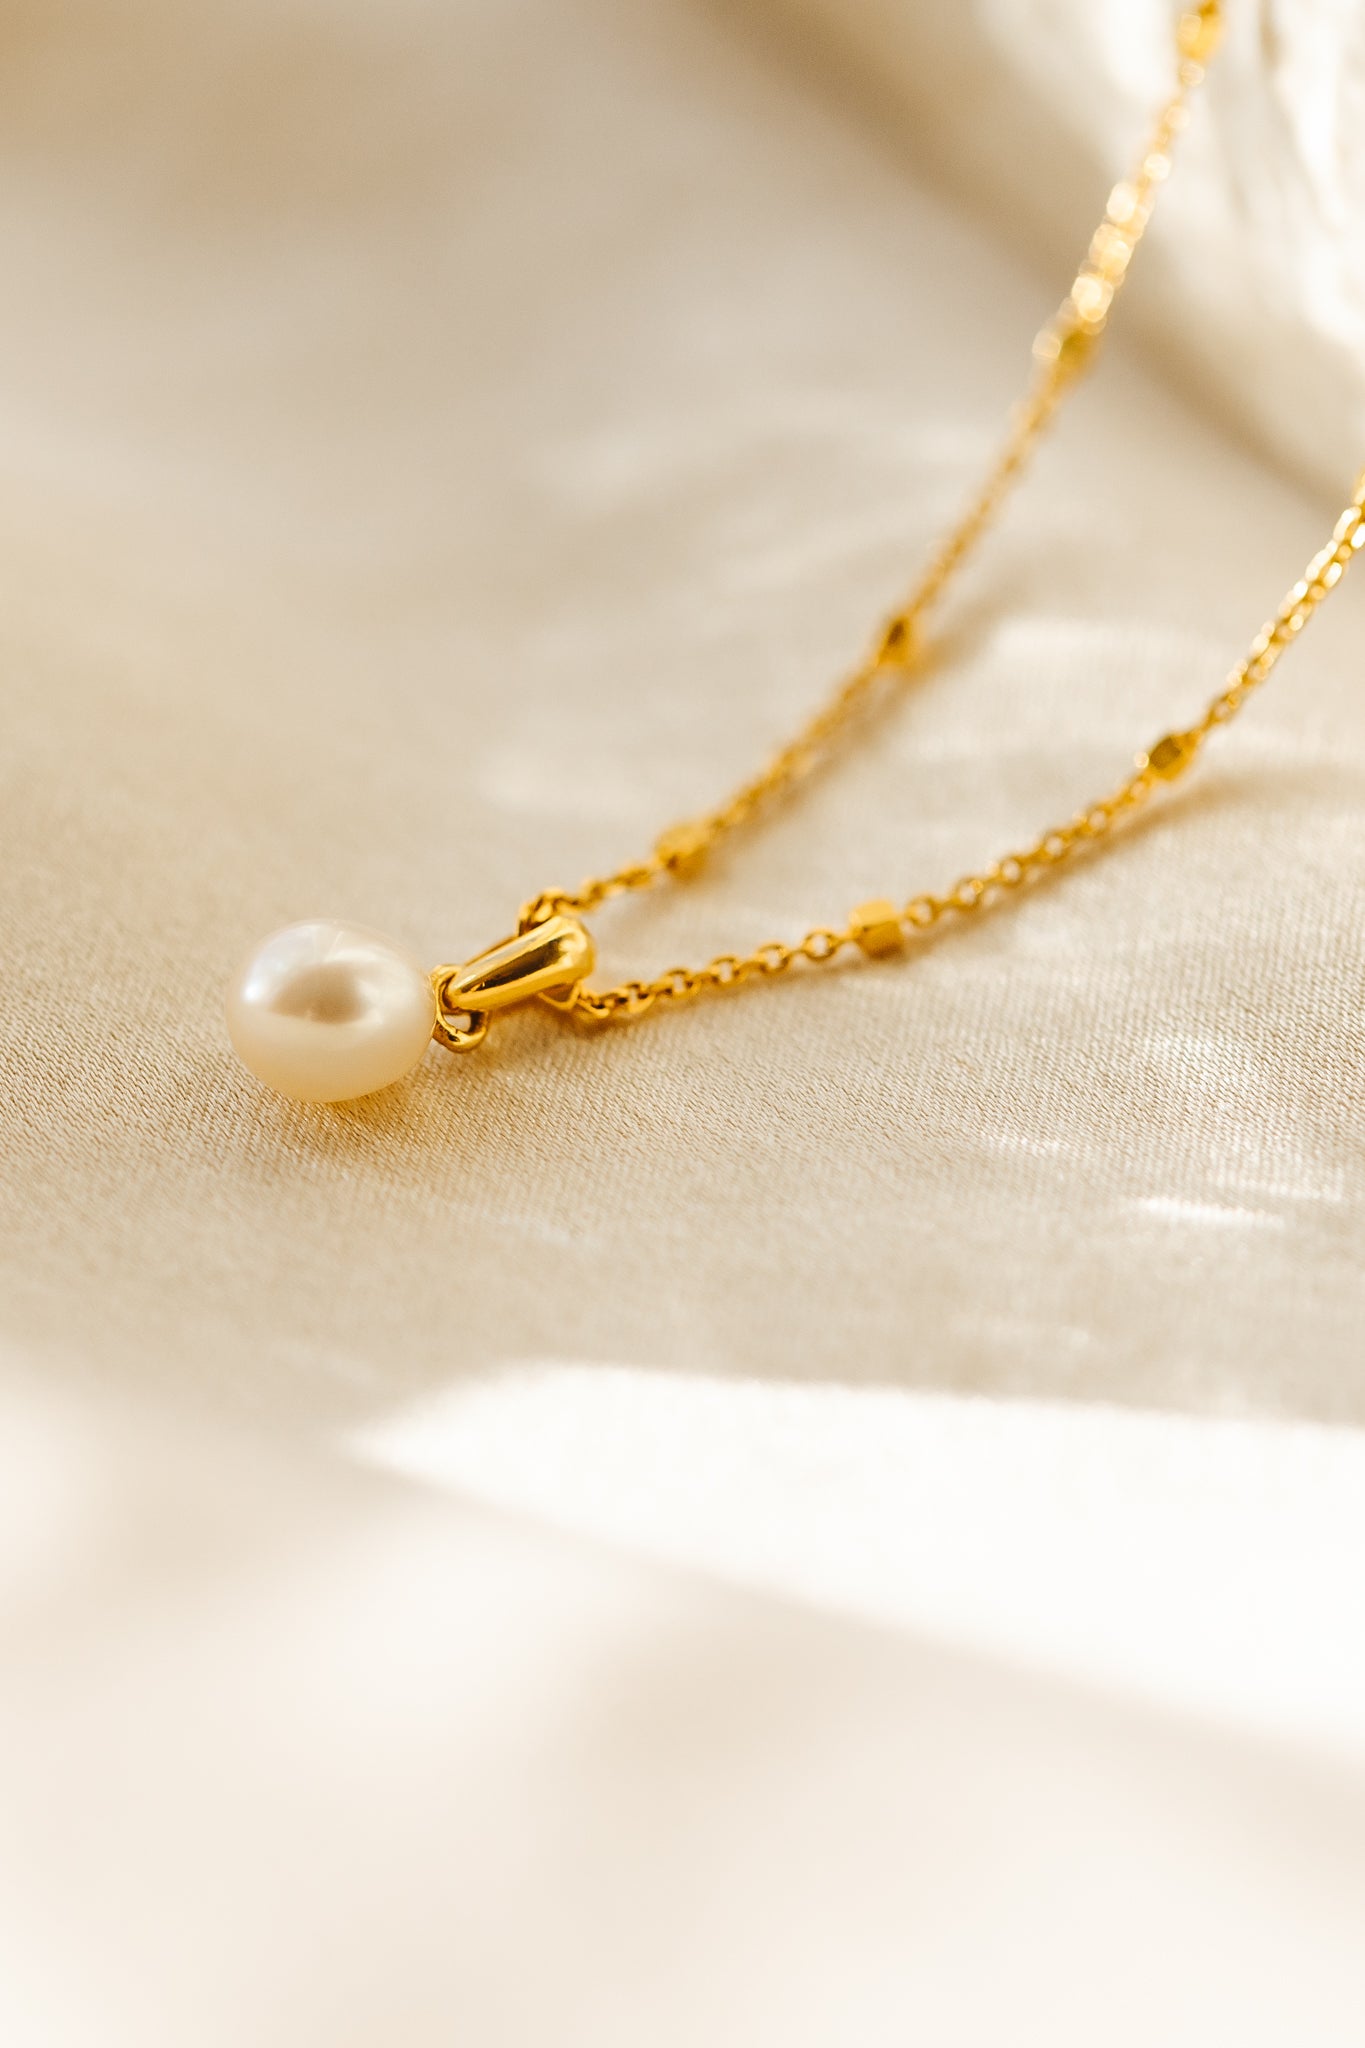 Gold chain with a teardrop-shaped freshwater pearl